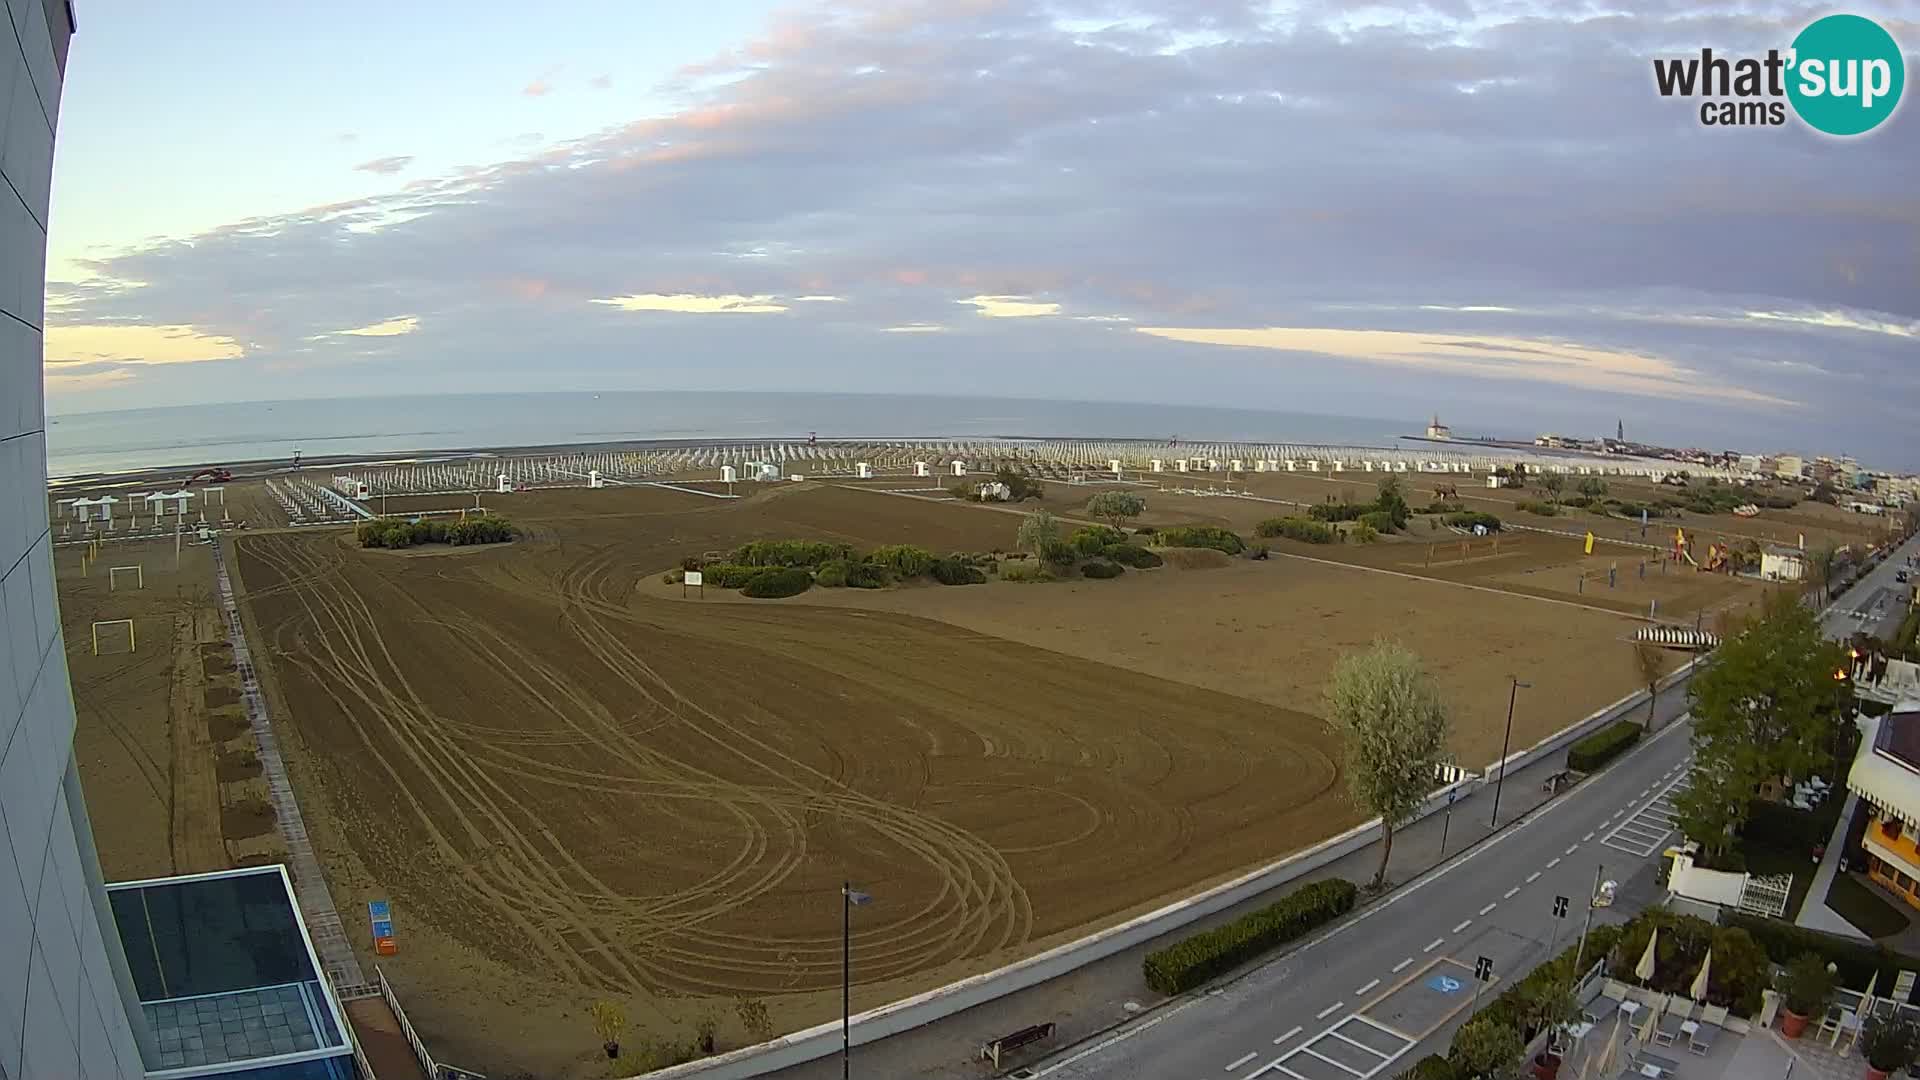 Hotel Panoramic Live view Caorle beach Levante webcam – Italy